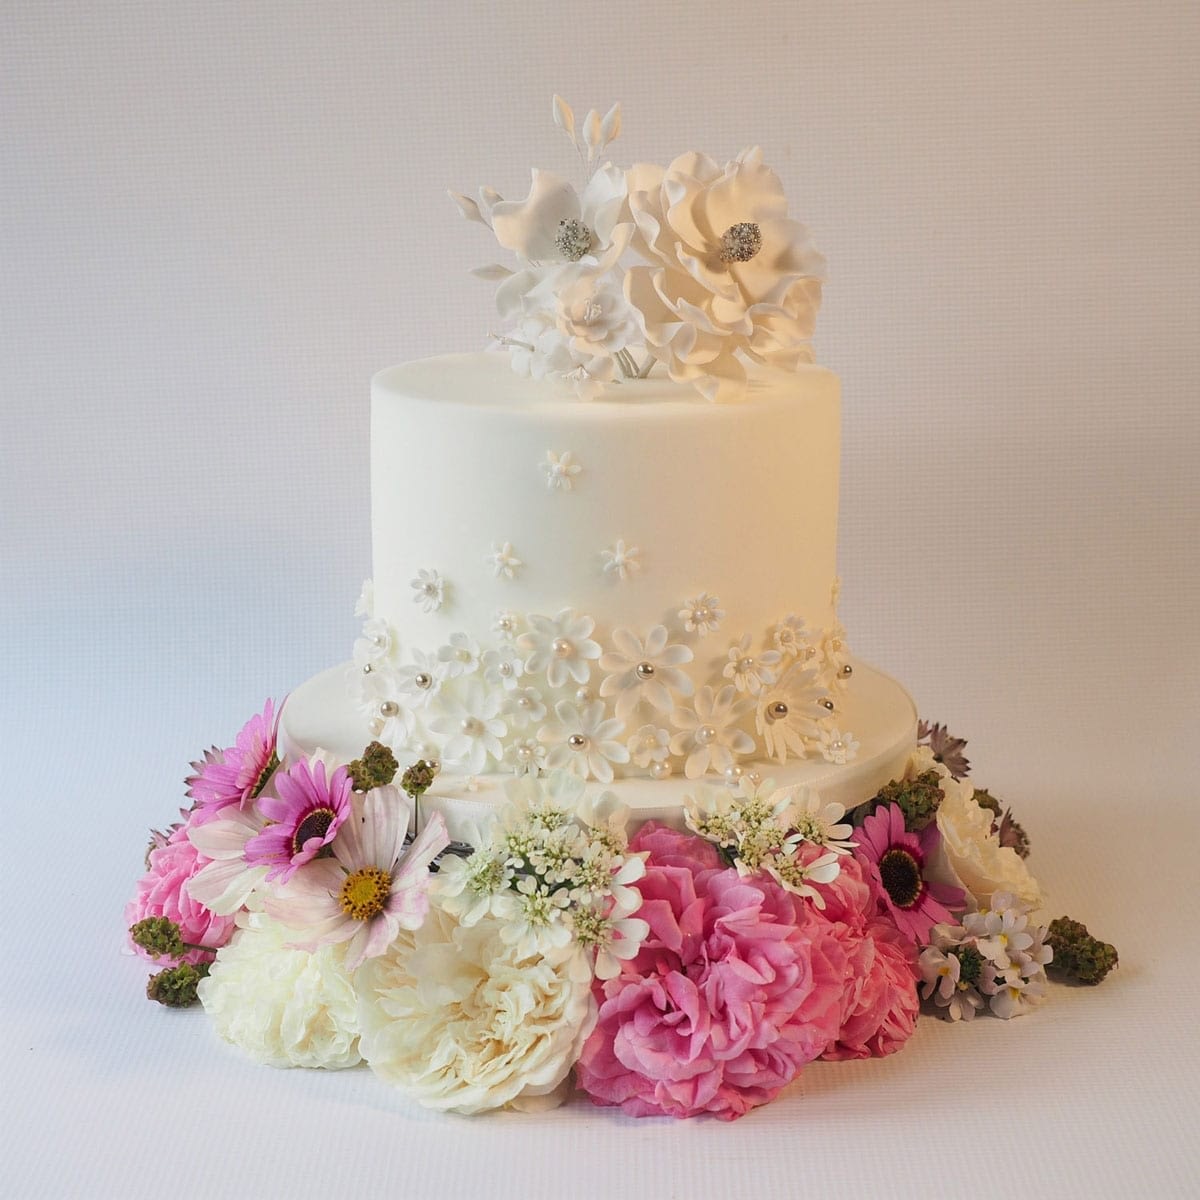 Stunning Wedding Cakes Their Traditions History And Symbolism